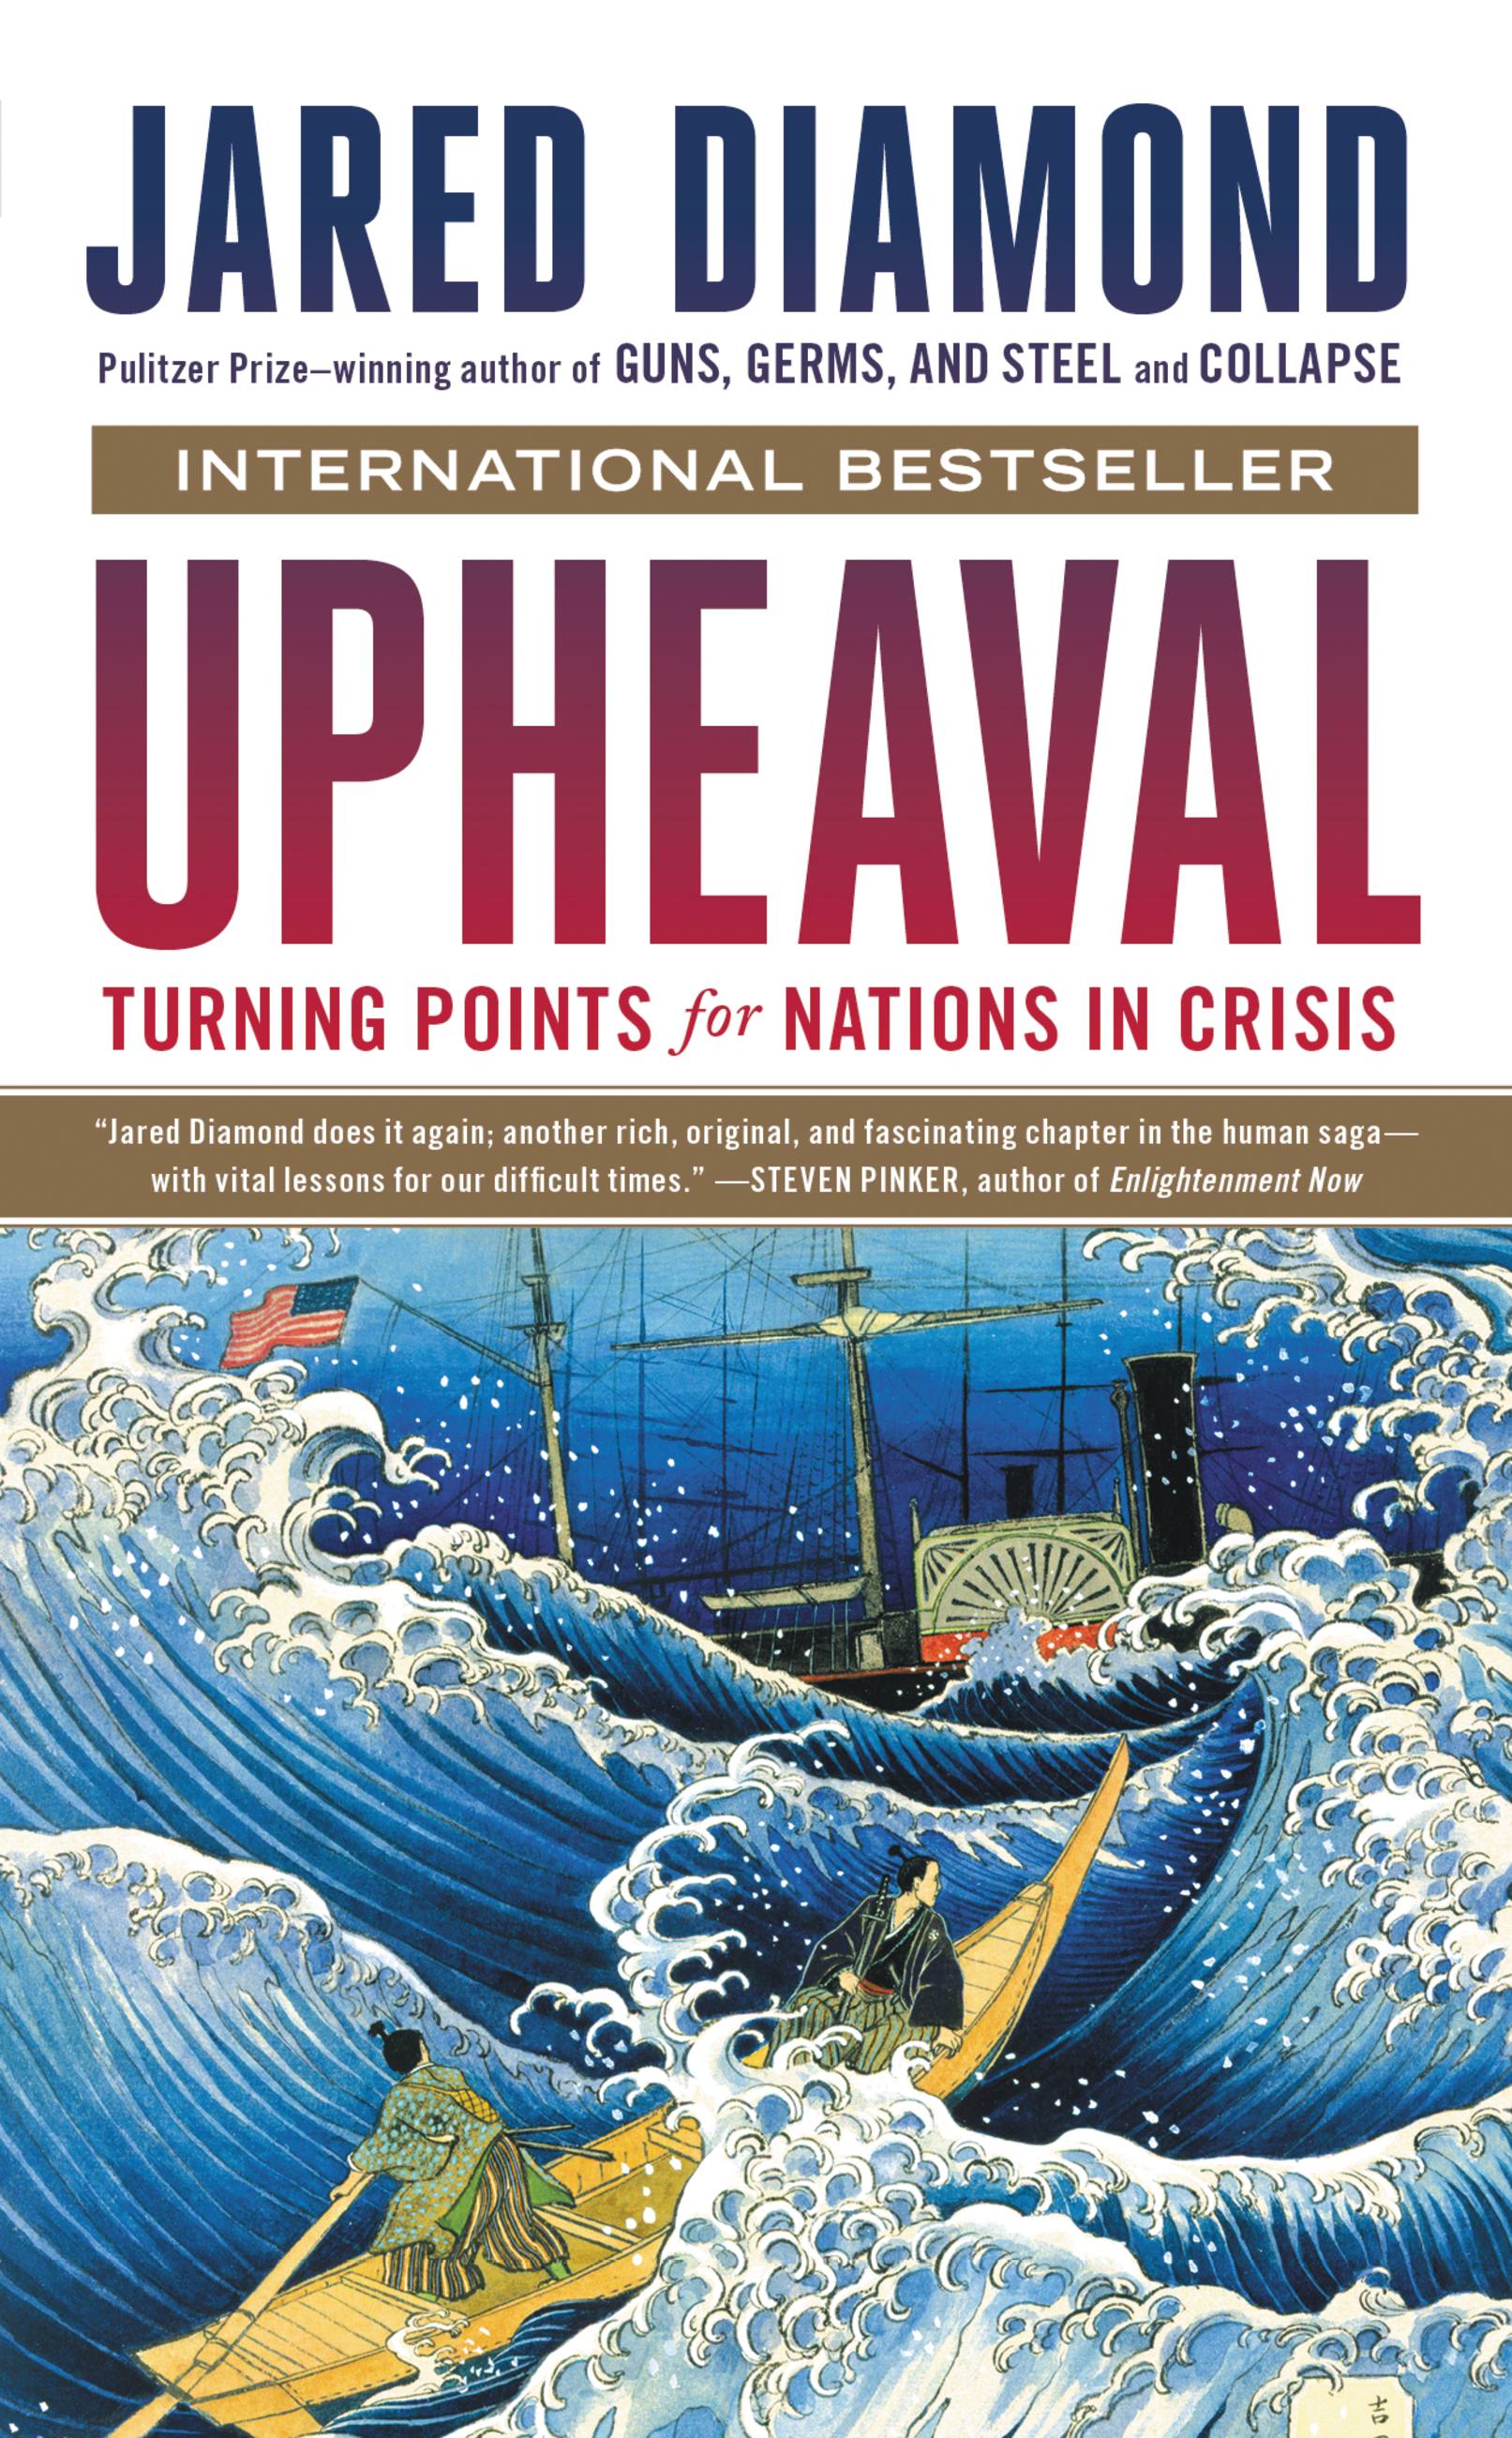 Umschlagbild für Upheaval [electronic resource] : Turning Points for Nations in Crisis